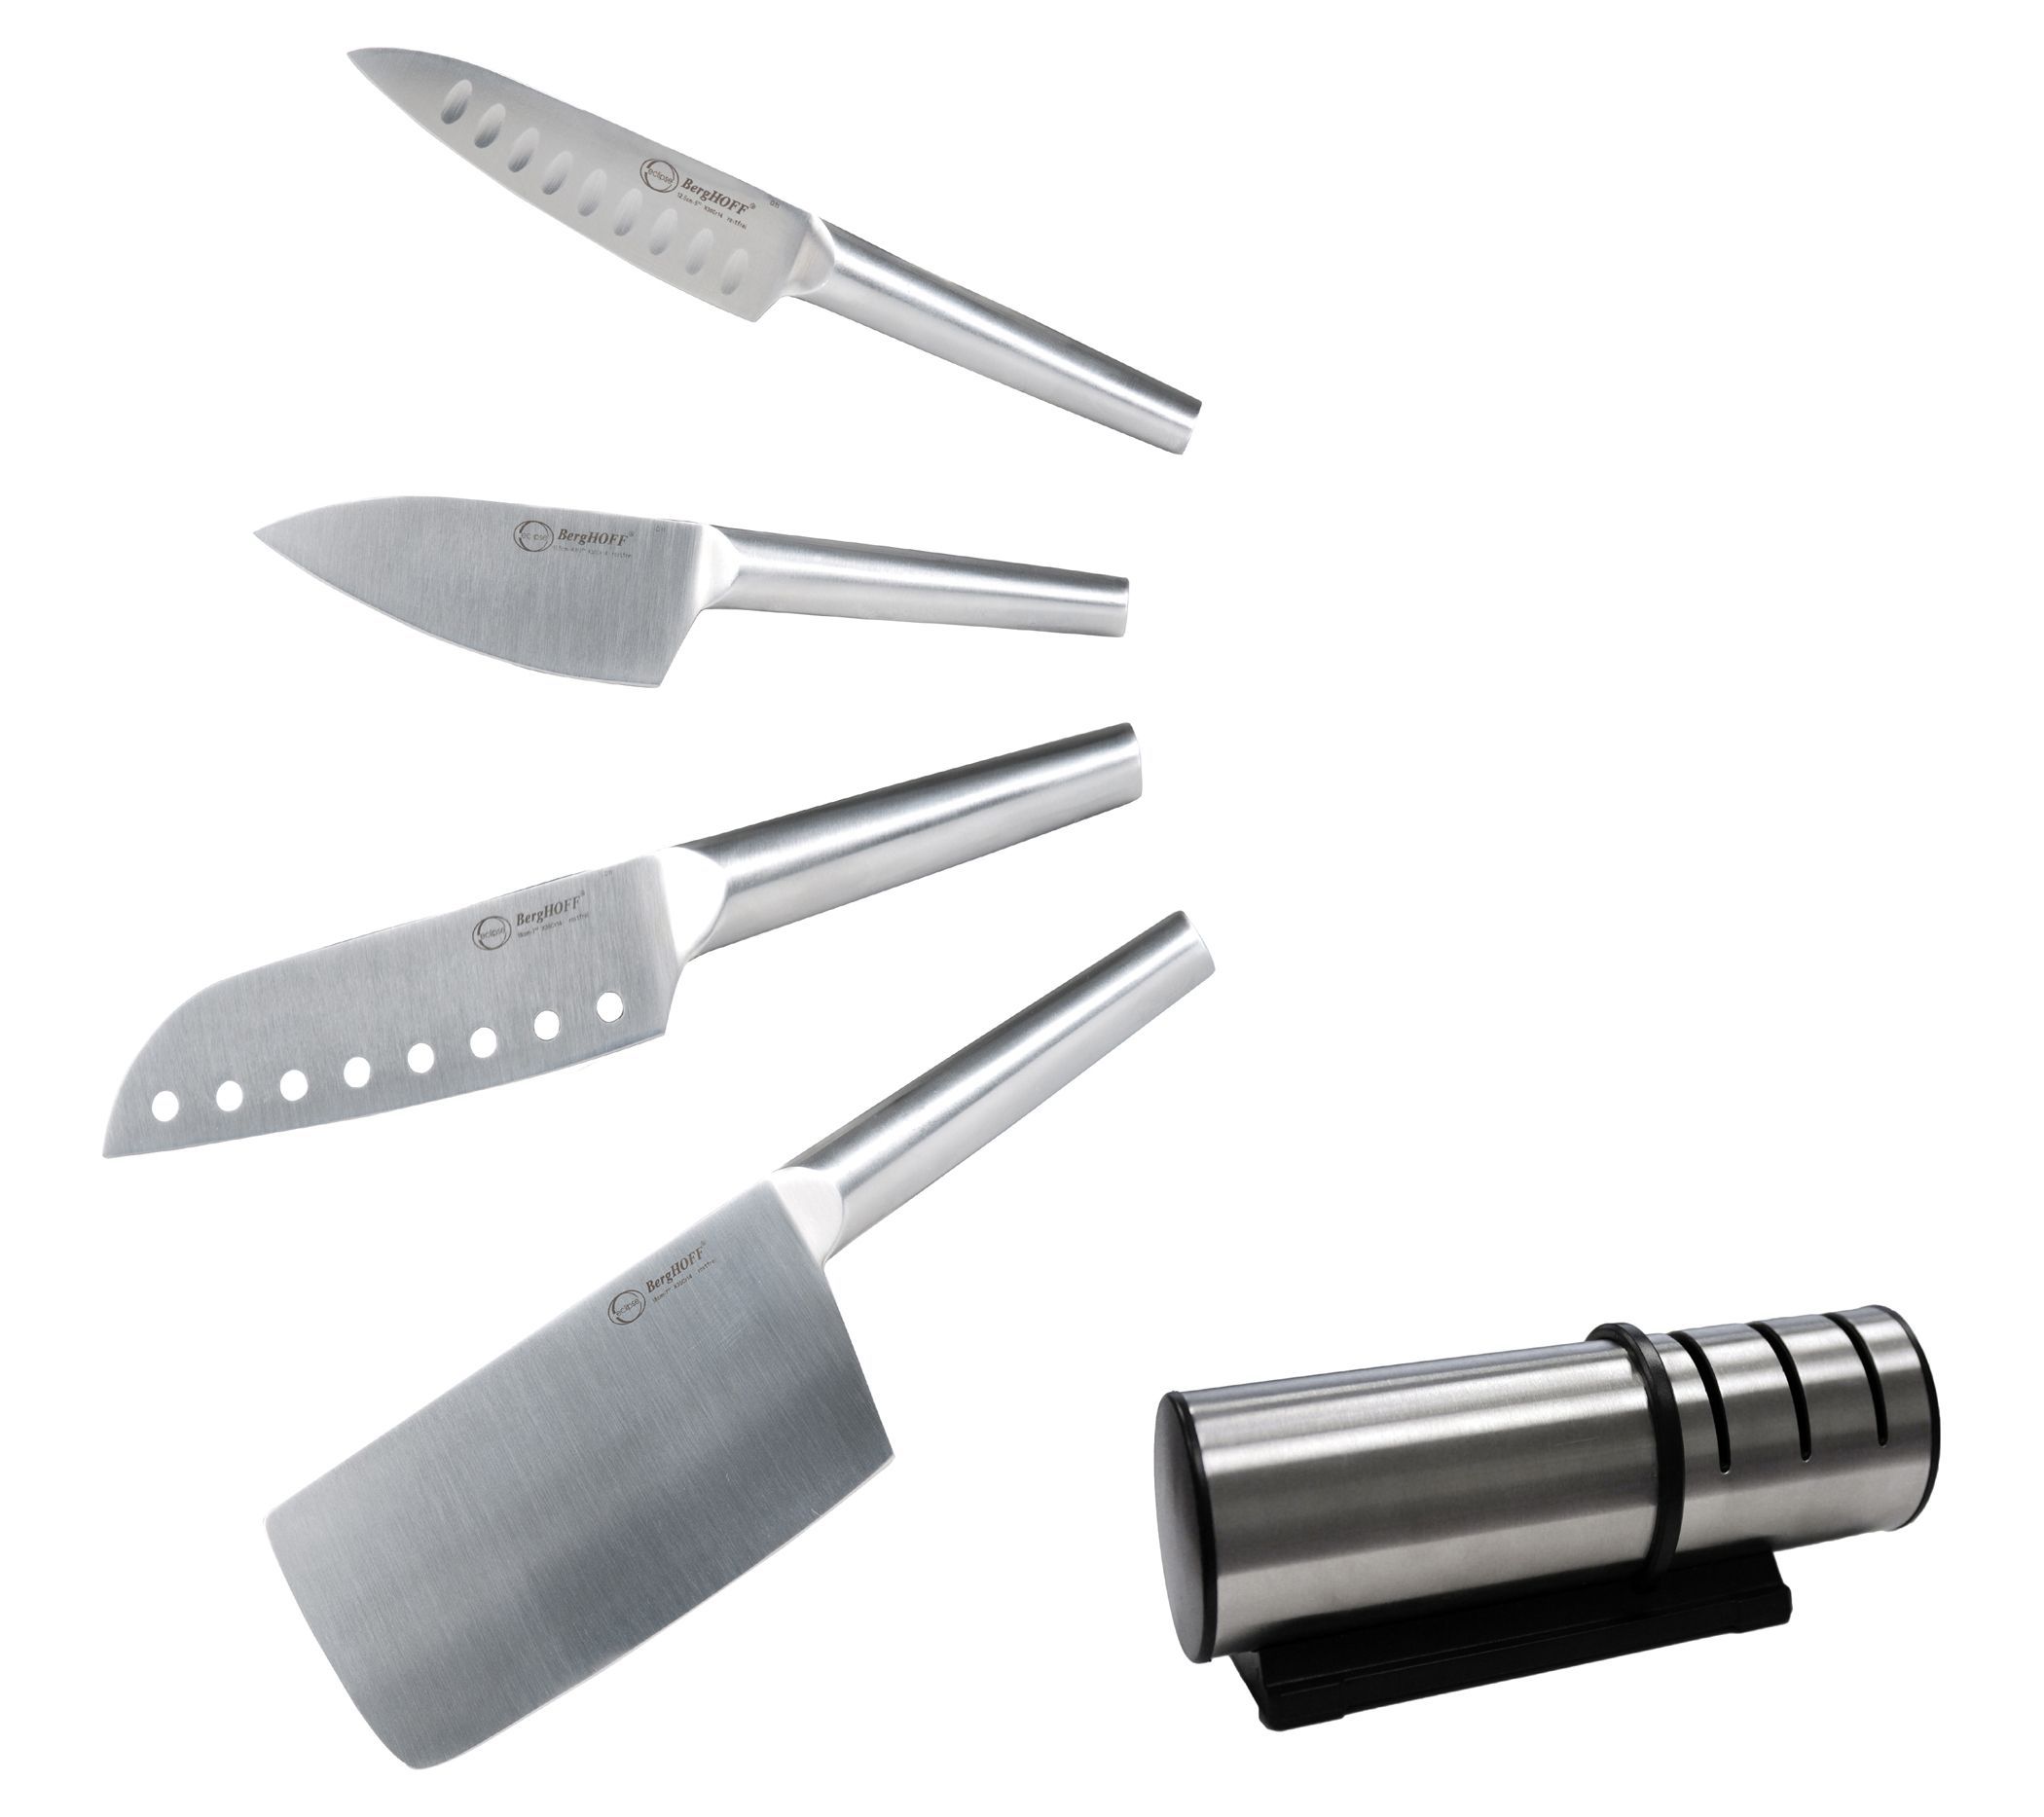 Skandia 5-Piece Stainless Steel Cutlery Set with Blade Guards